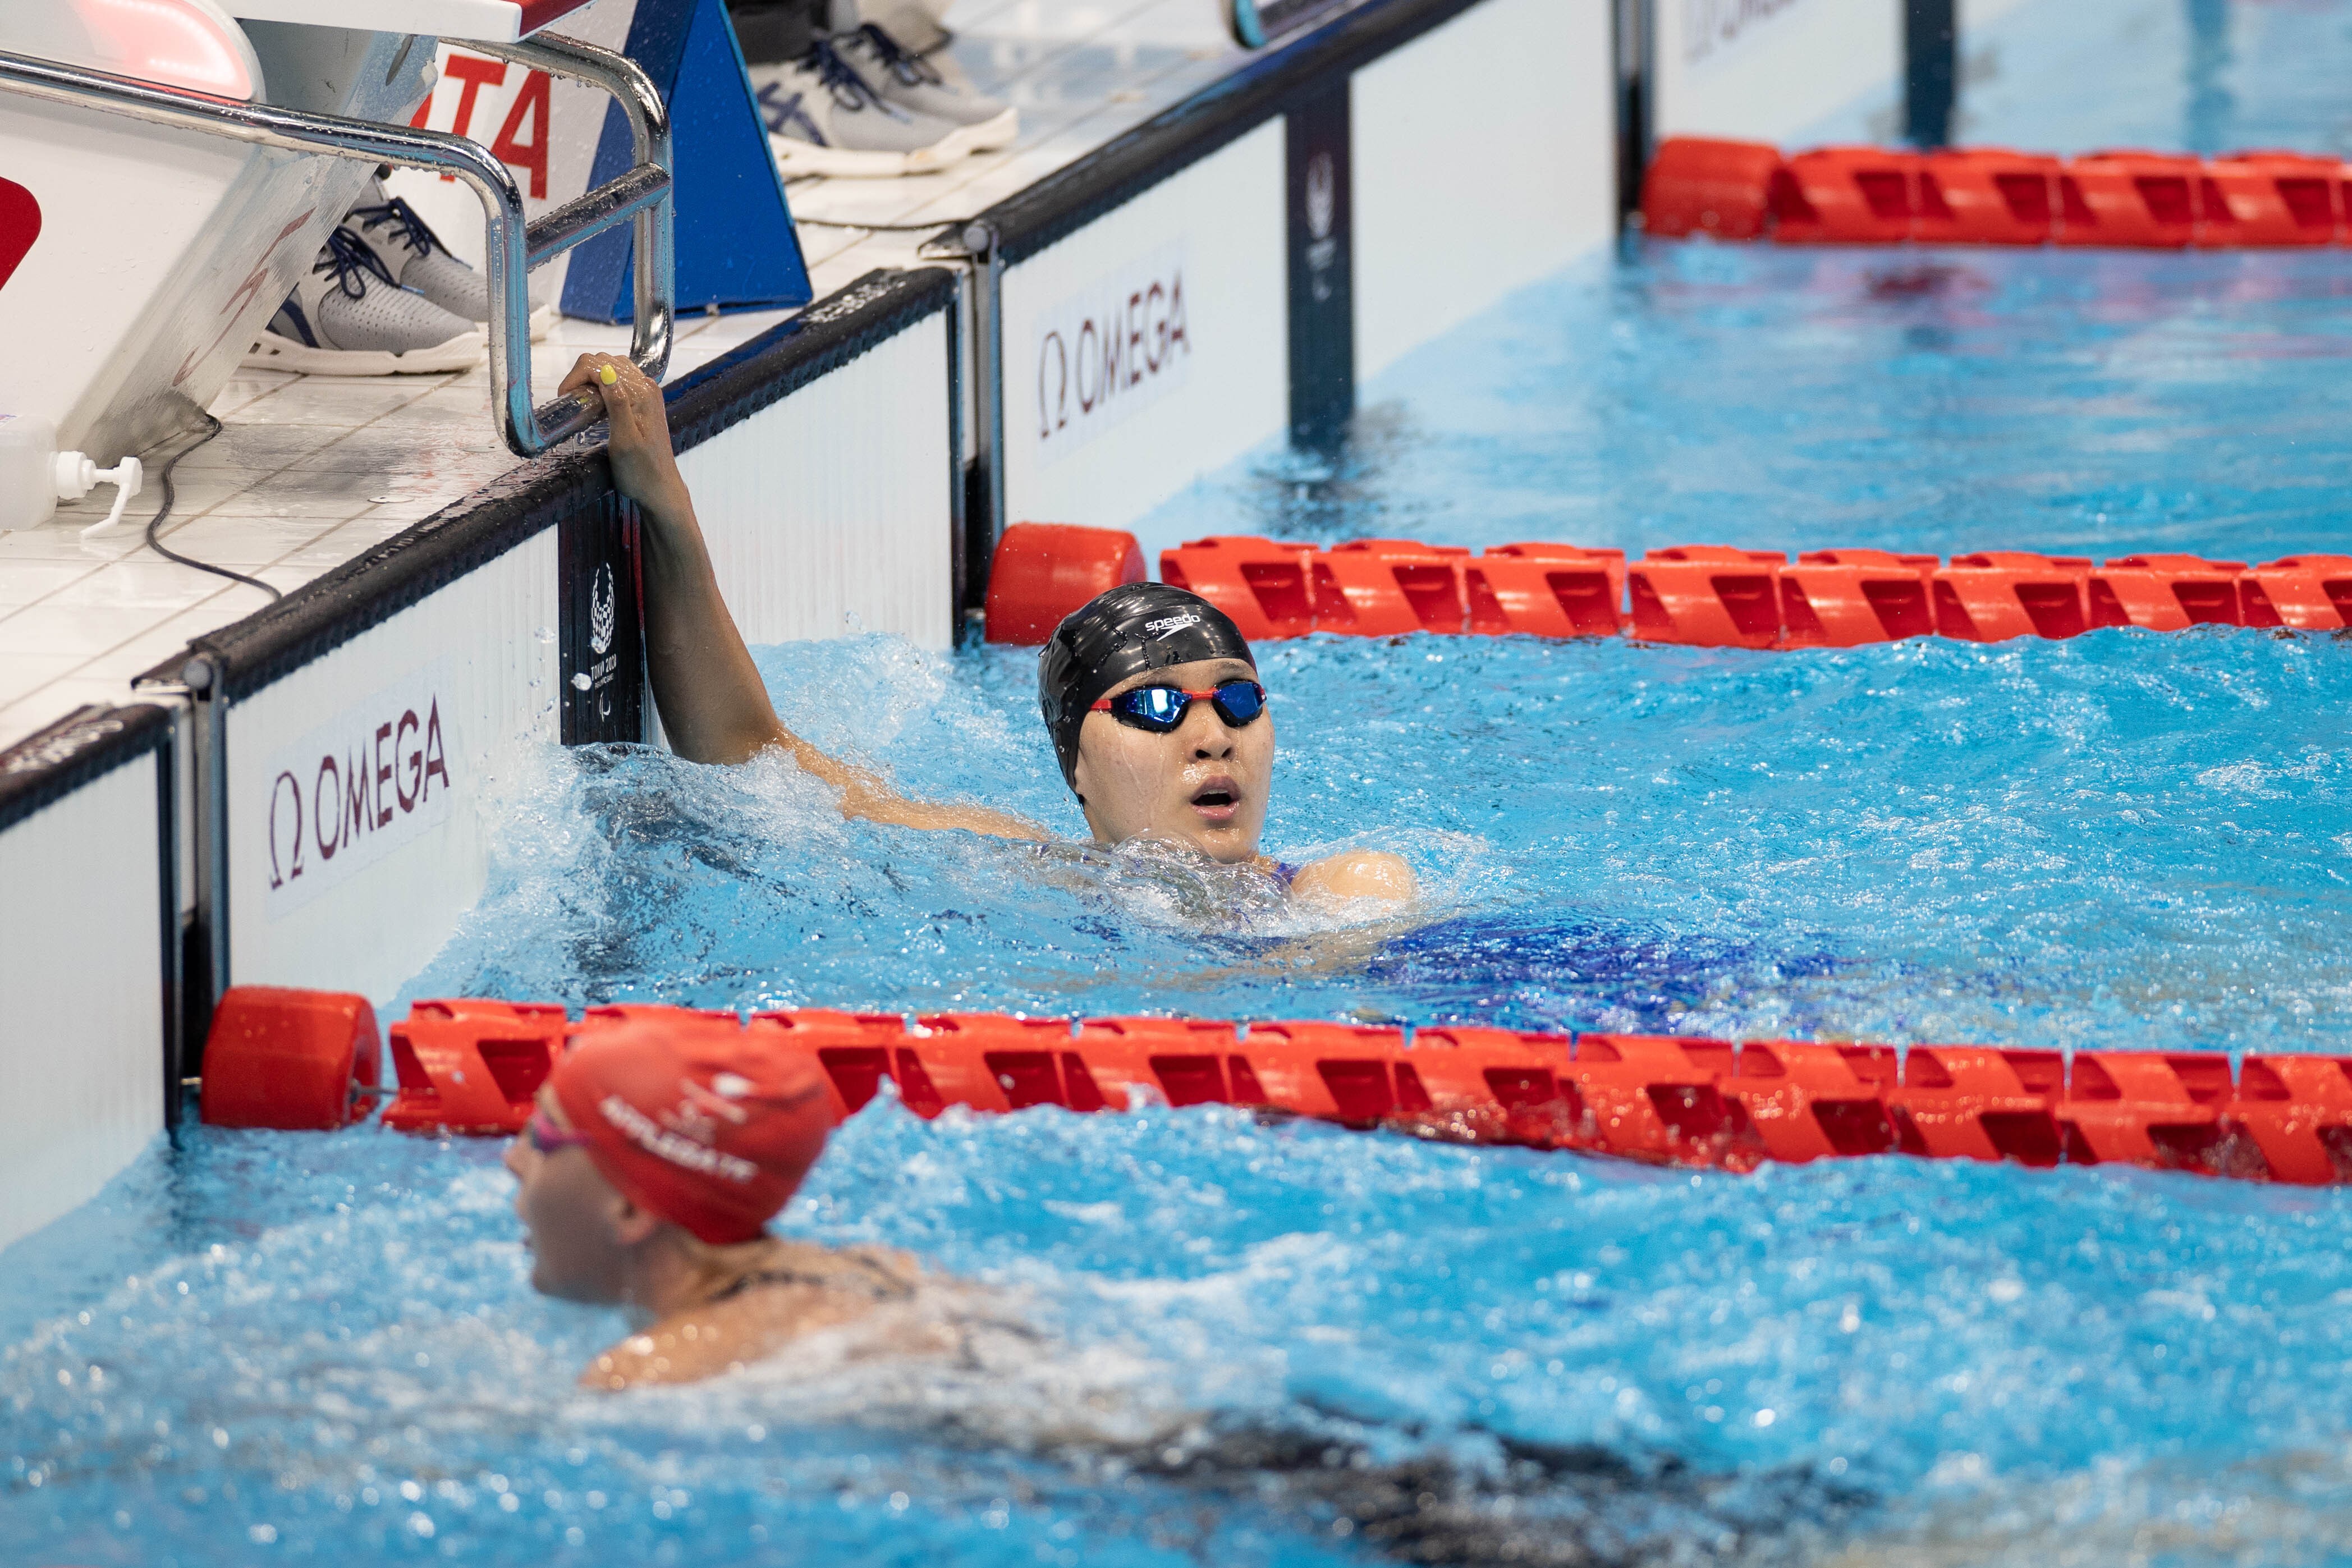 Hong Kong's Chan Yui-lam finishes first in the women's 100m butterfly (S14) heat 1 at the Tokyo 2020 Paralympic Games in the Tokyo Aquatics Centre in August. Photo: Hong Kong Paralympic Committee